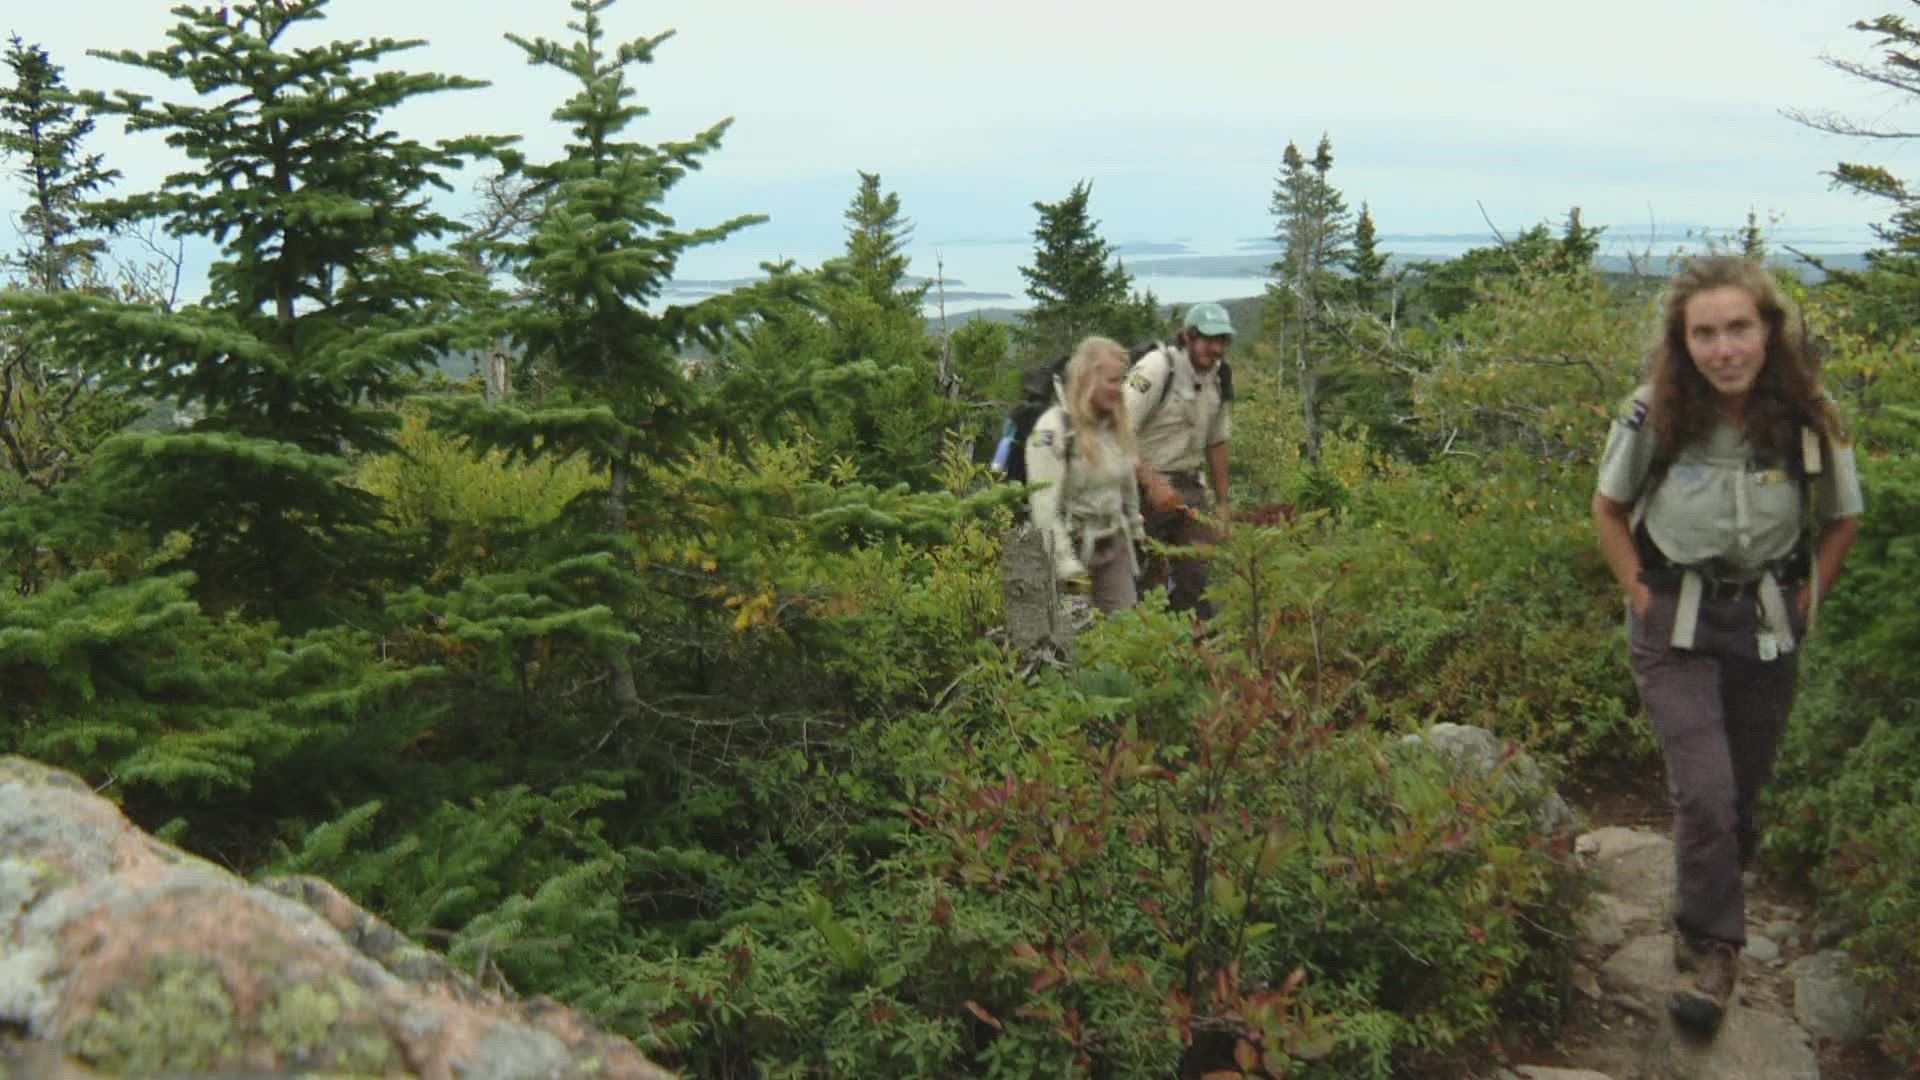 Fortunately, Acadia’s Summit Stewards are there to help